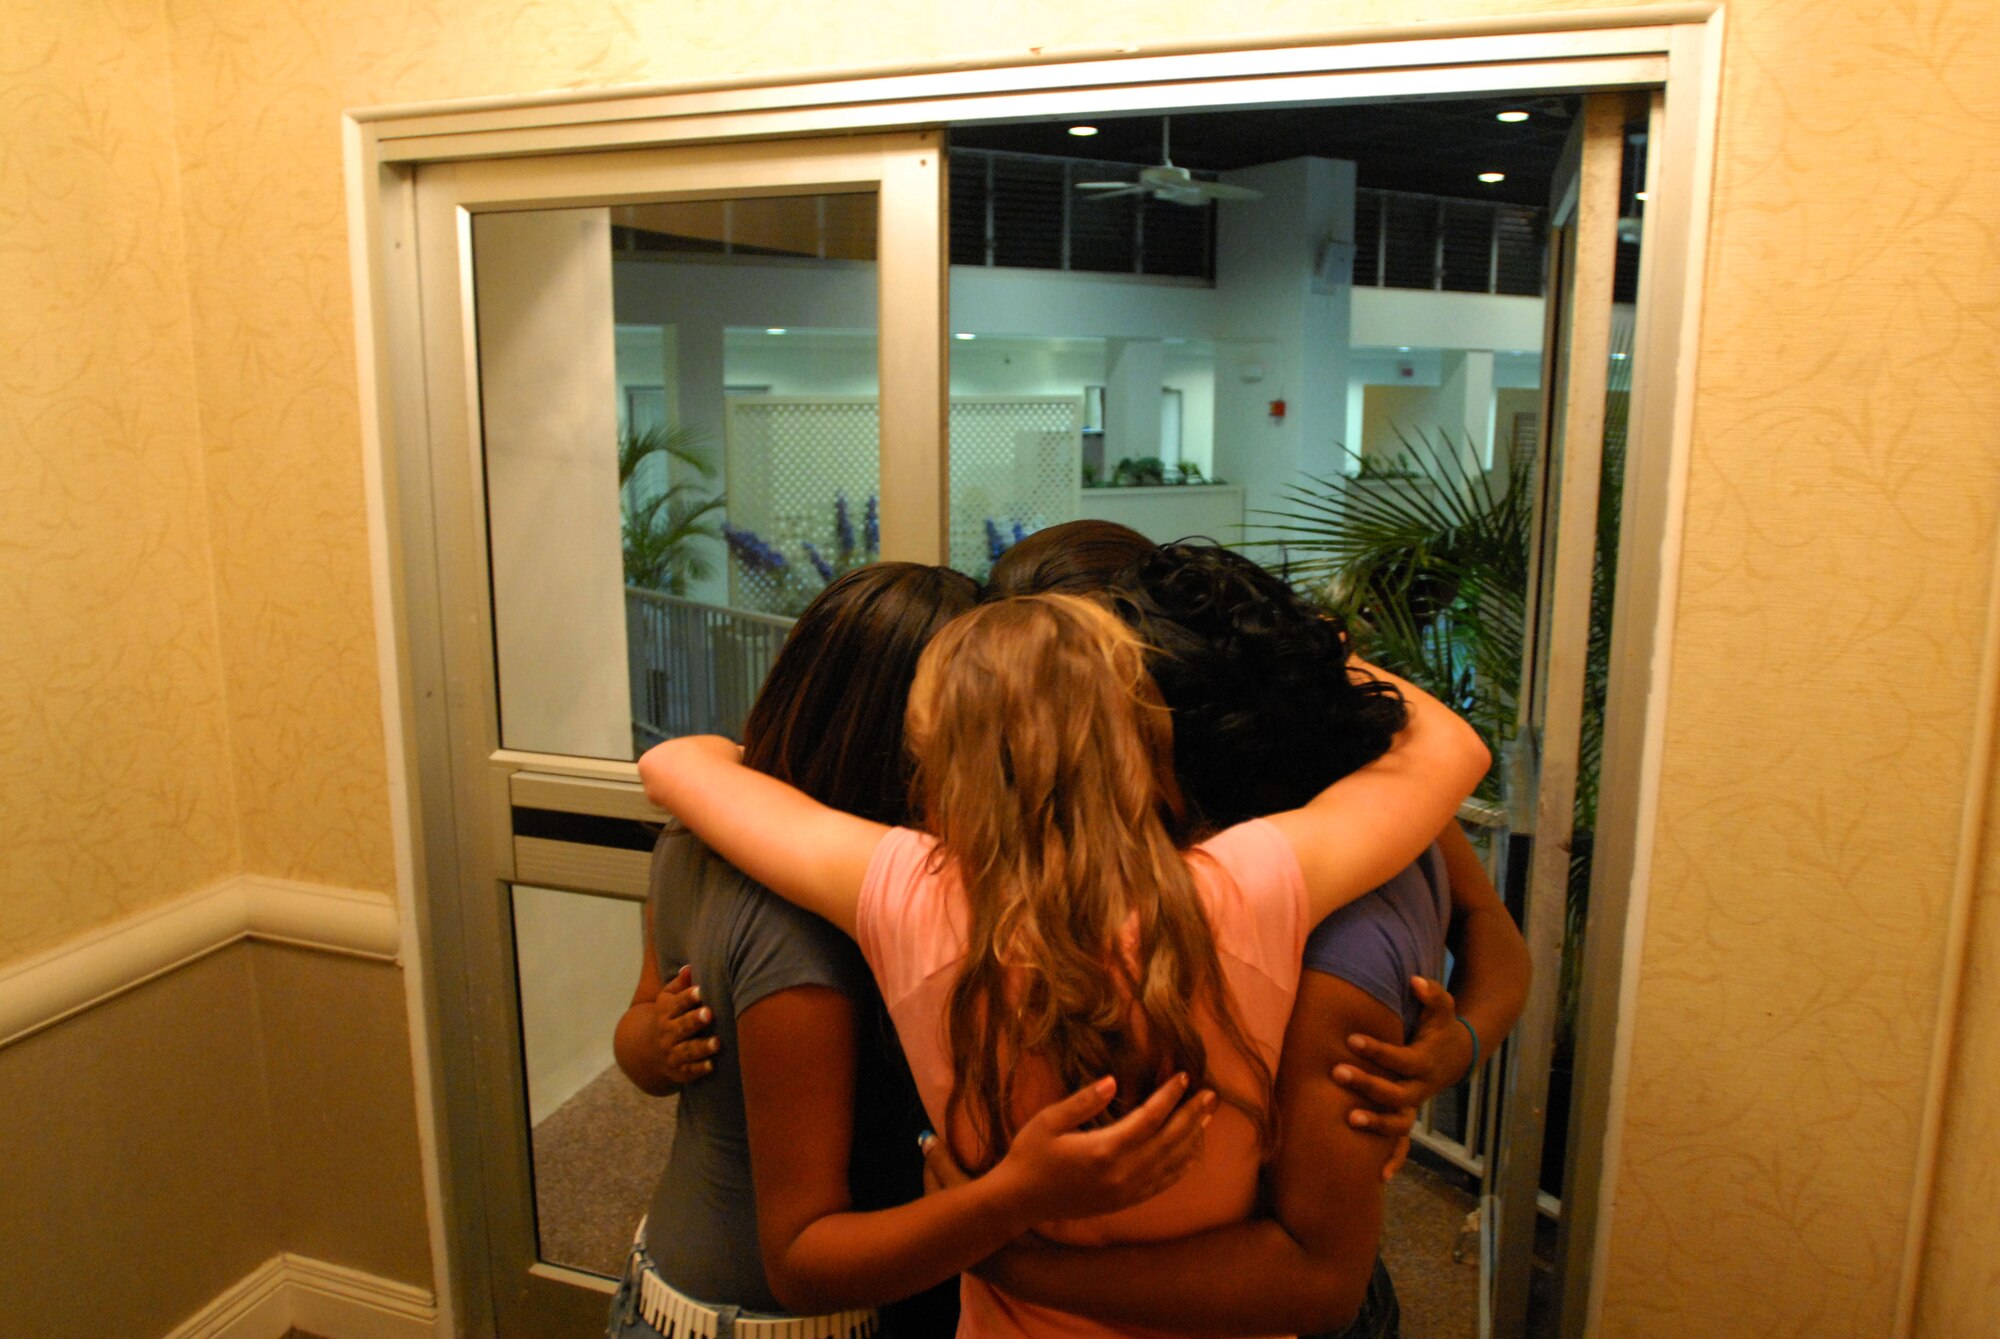 JOINT BASE PEARL HARBOR HICKAM, Hawaii – Teen beauty pageant contestants do one final group hug and prayer before performing during The Hickam Air Force Base Teen Scholarship Pageant here, March 20. The pageant was presented by the Women’s History Month Committee and was able to acquire scholarships for all participants. (U.S. Air Force photo/Senior Airman Gustavo Gonzalez)